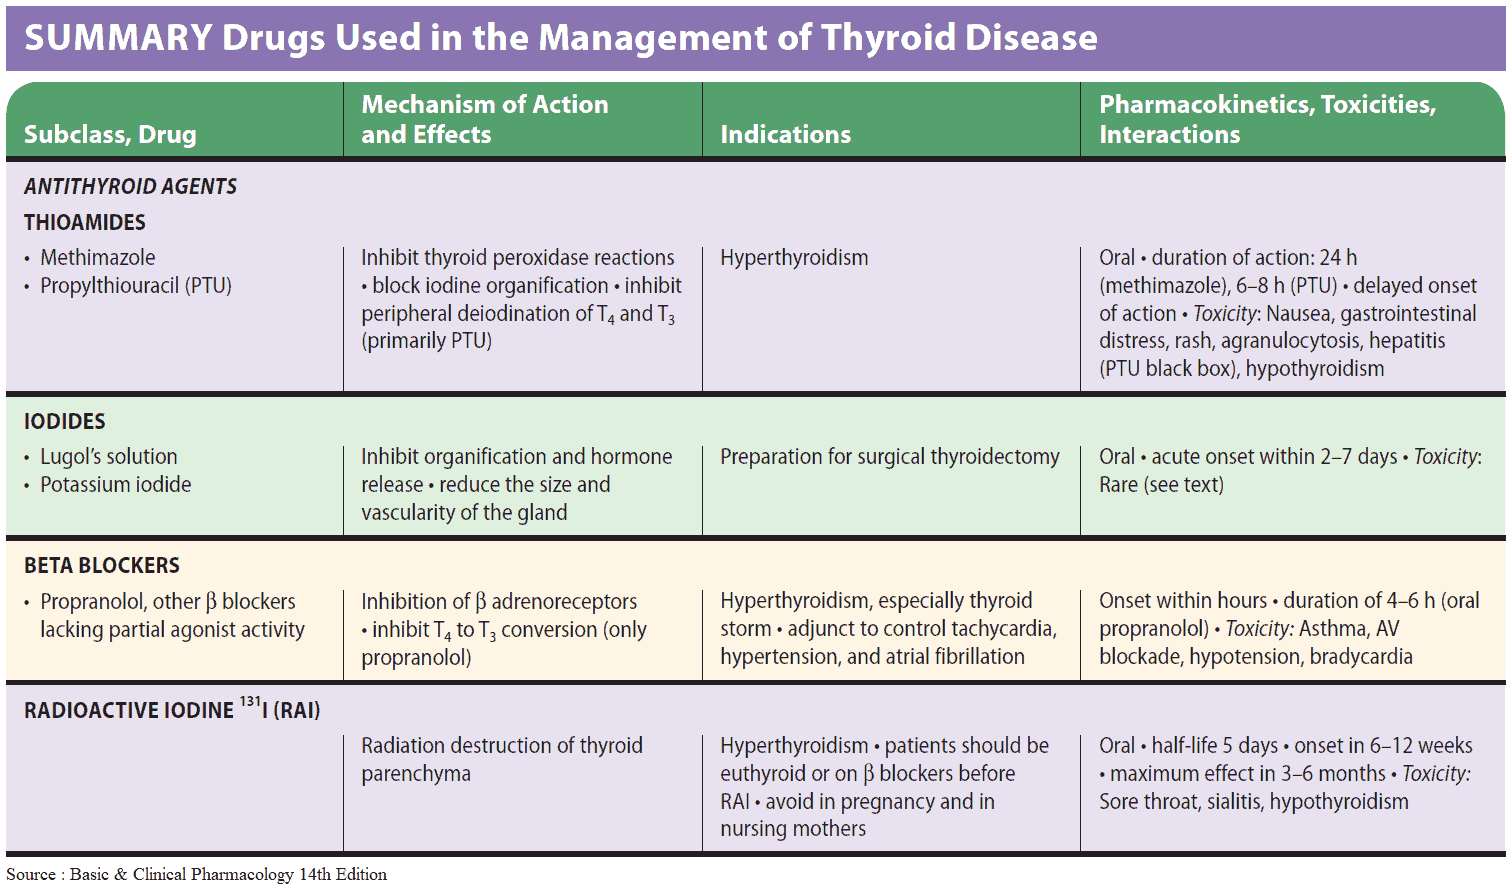 Drugs Used in the Management of Hyperthyroidism and Thyrotoxicosis